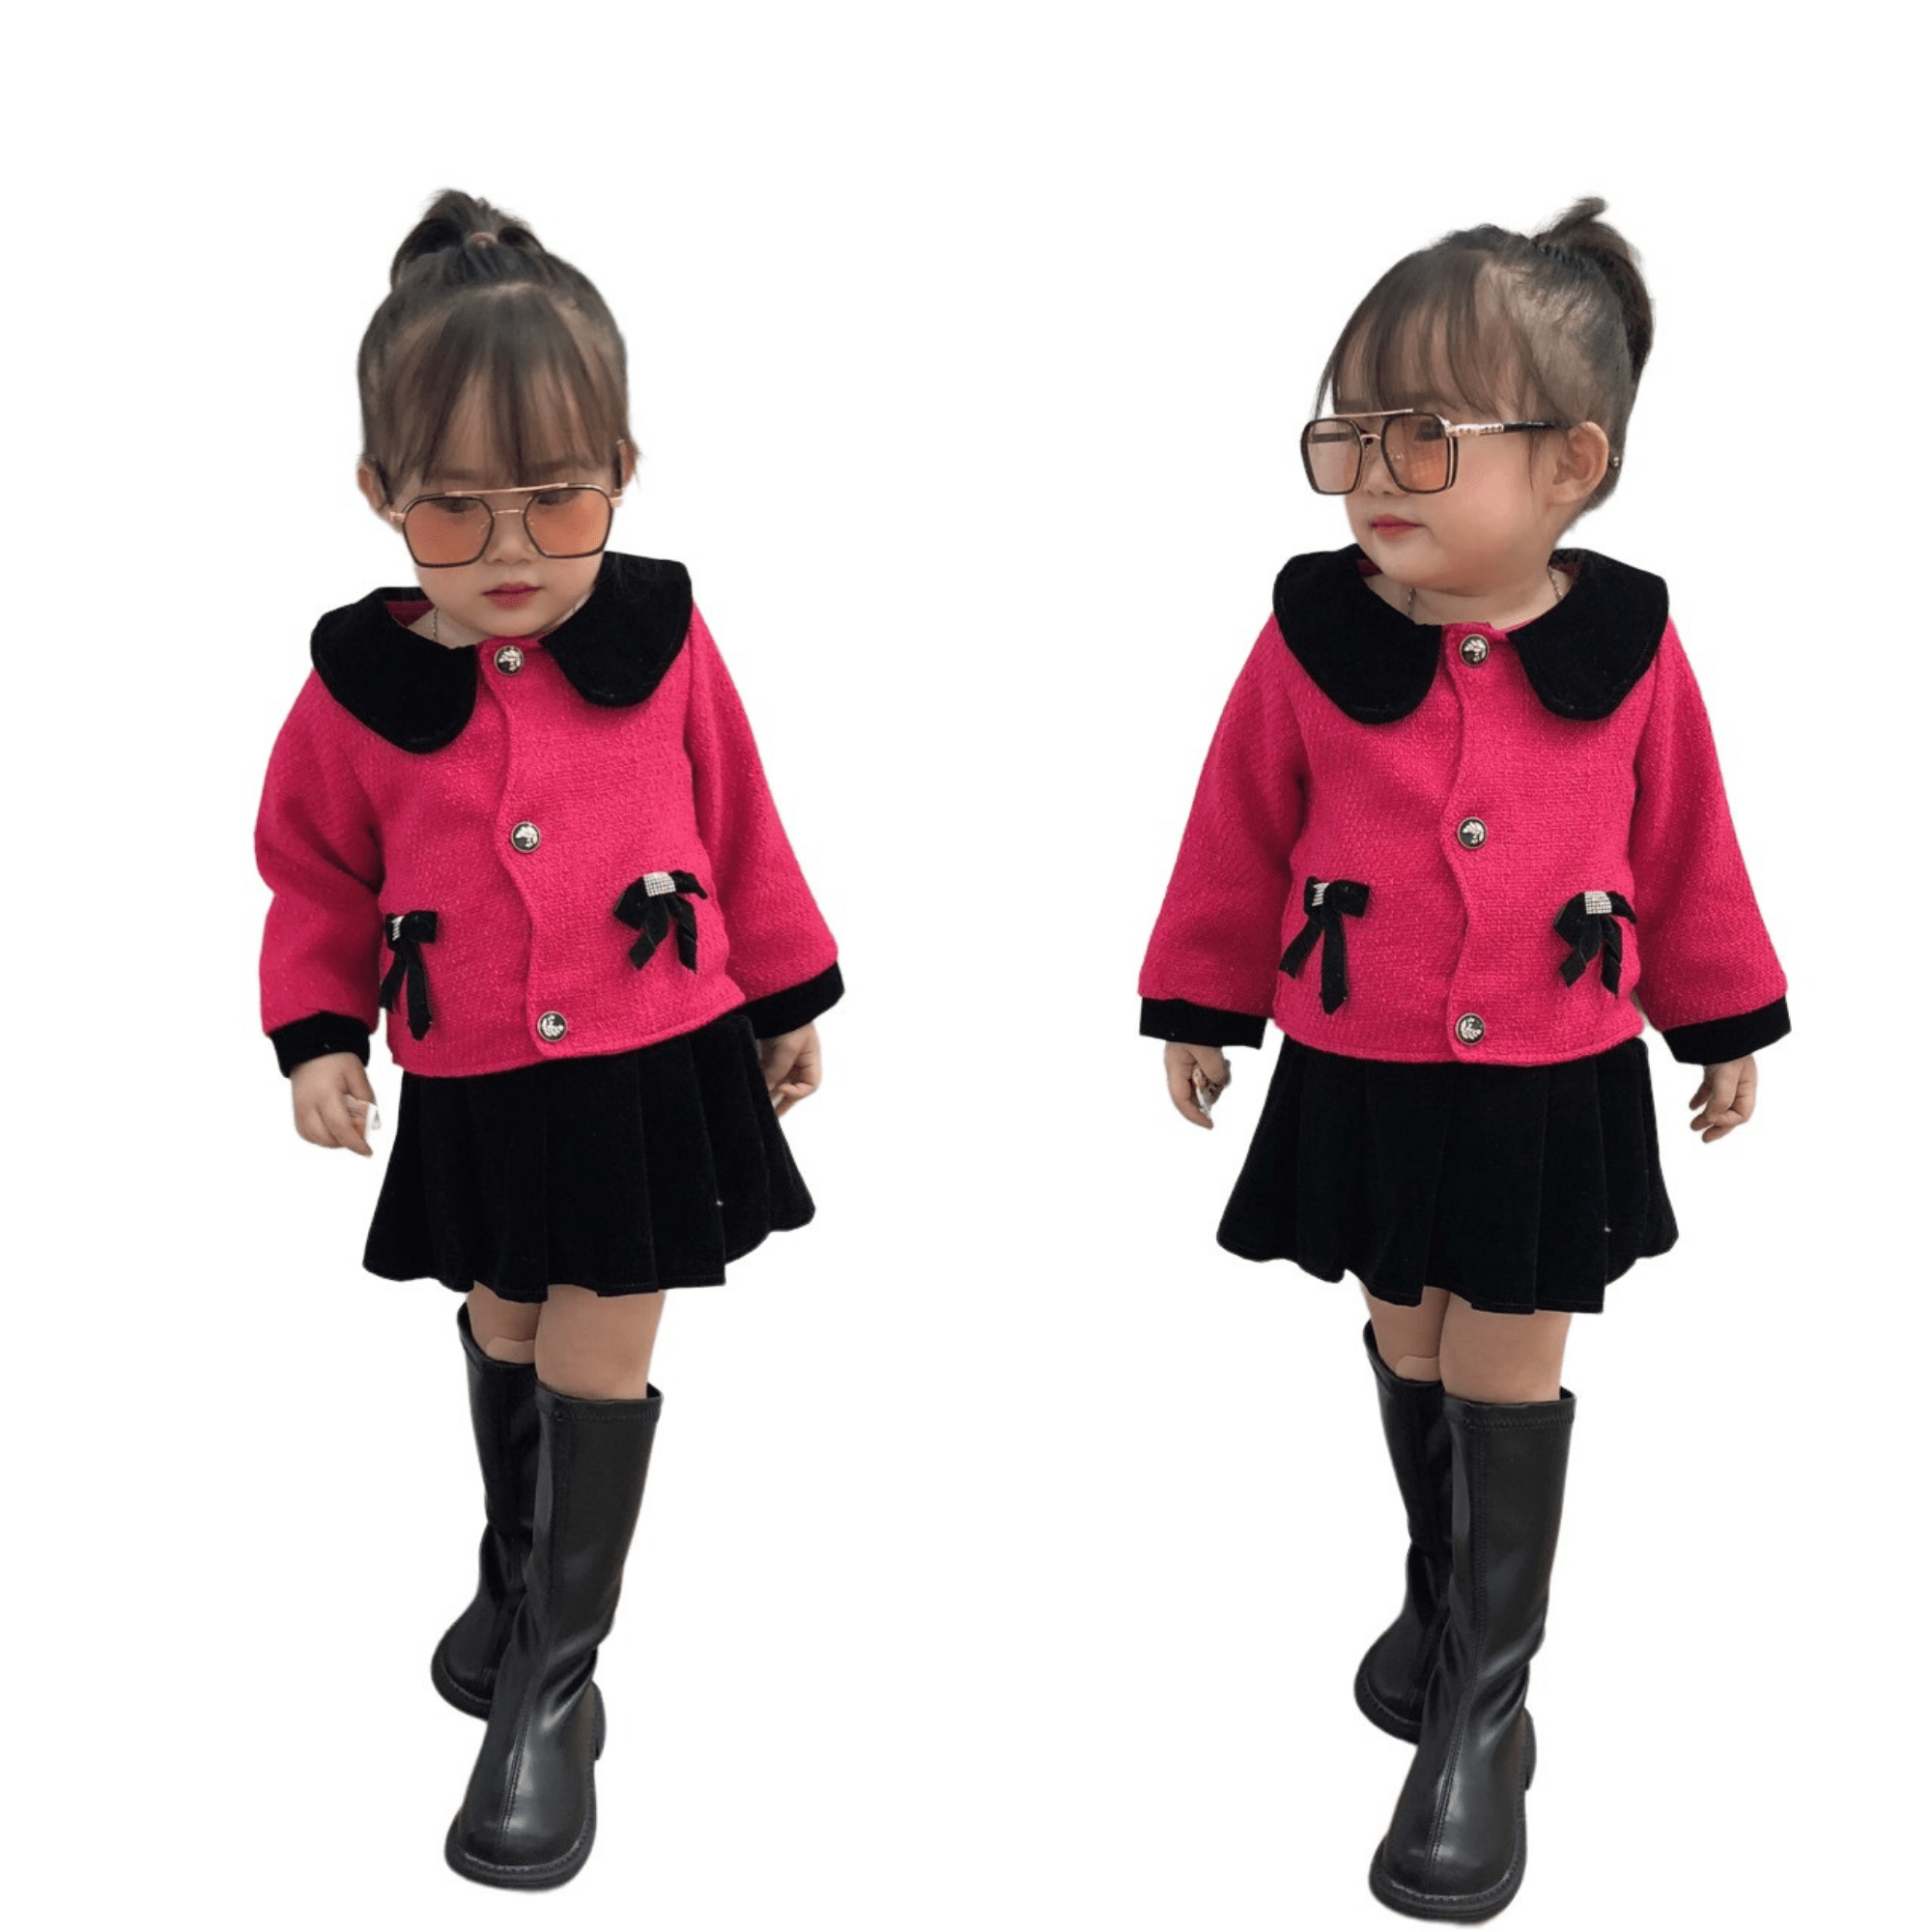 Clothes For Kids Girls Comfortable 100% Wool Dresses Cute Each One In Opp Bag From Vietnam Manufacturer